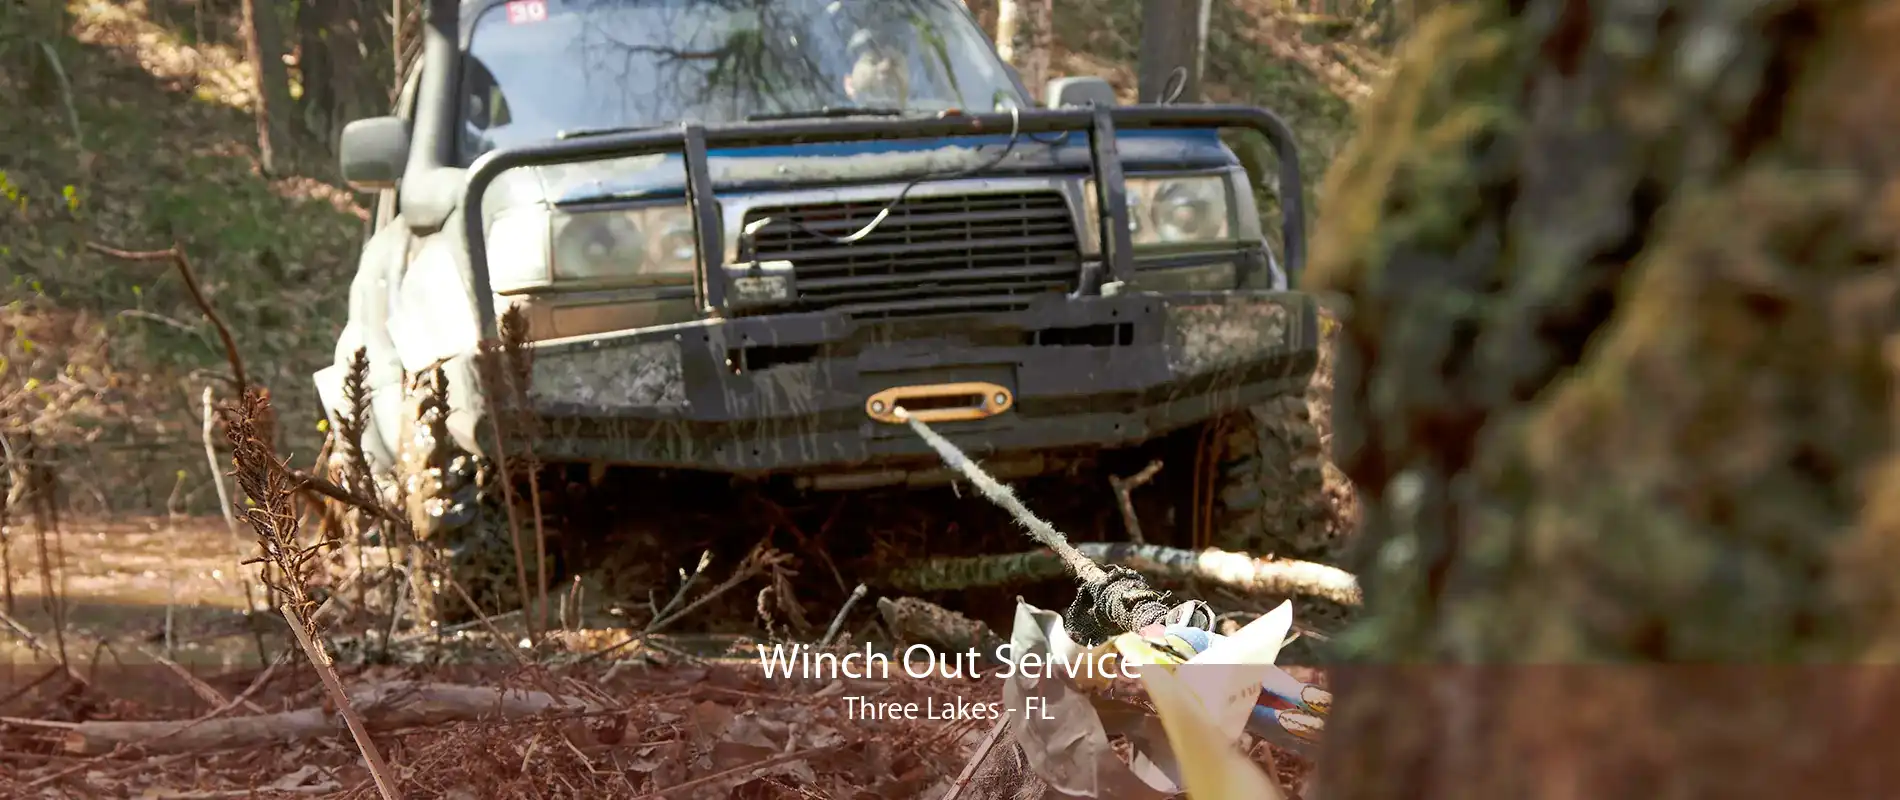 Winch Out Service Three Lakes - FL